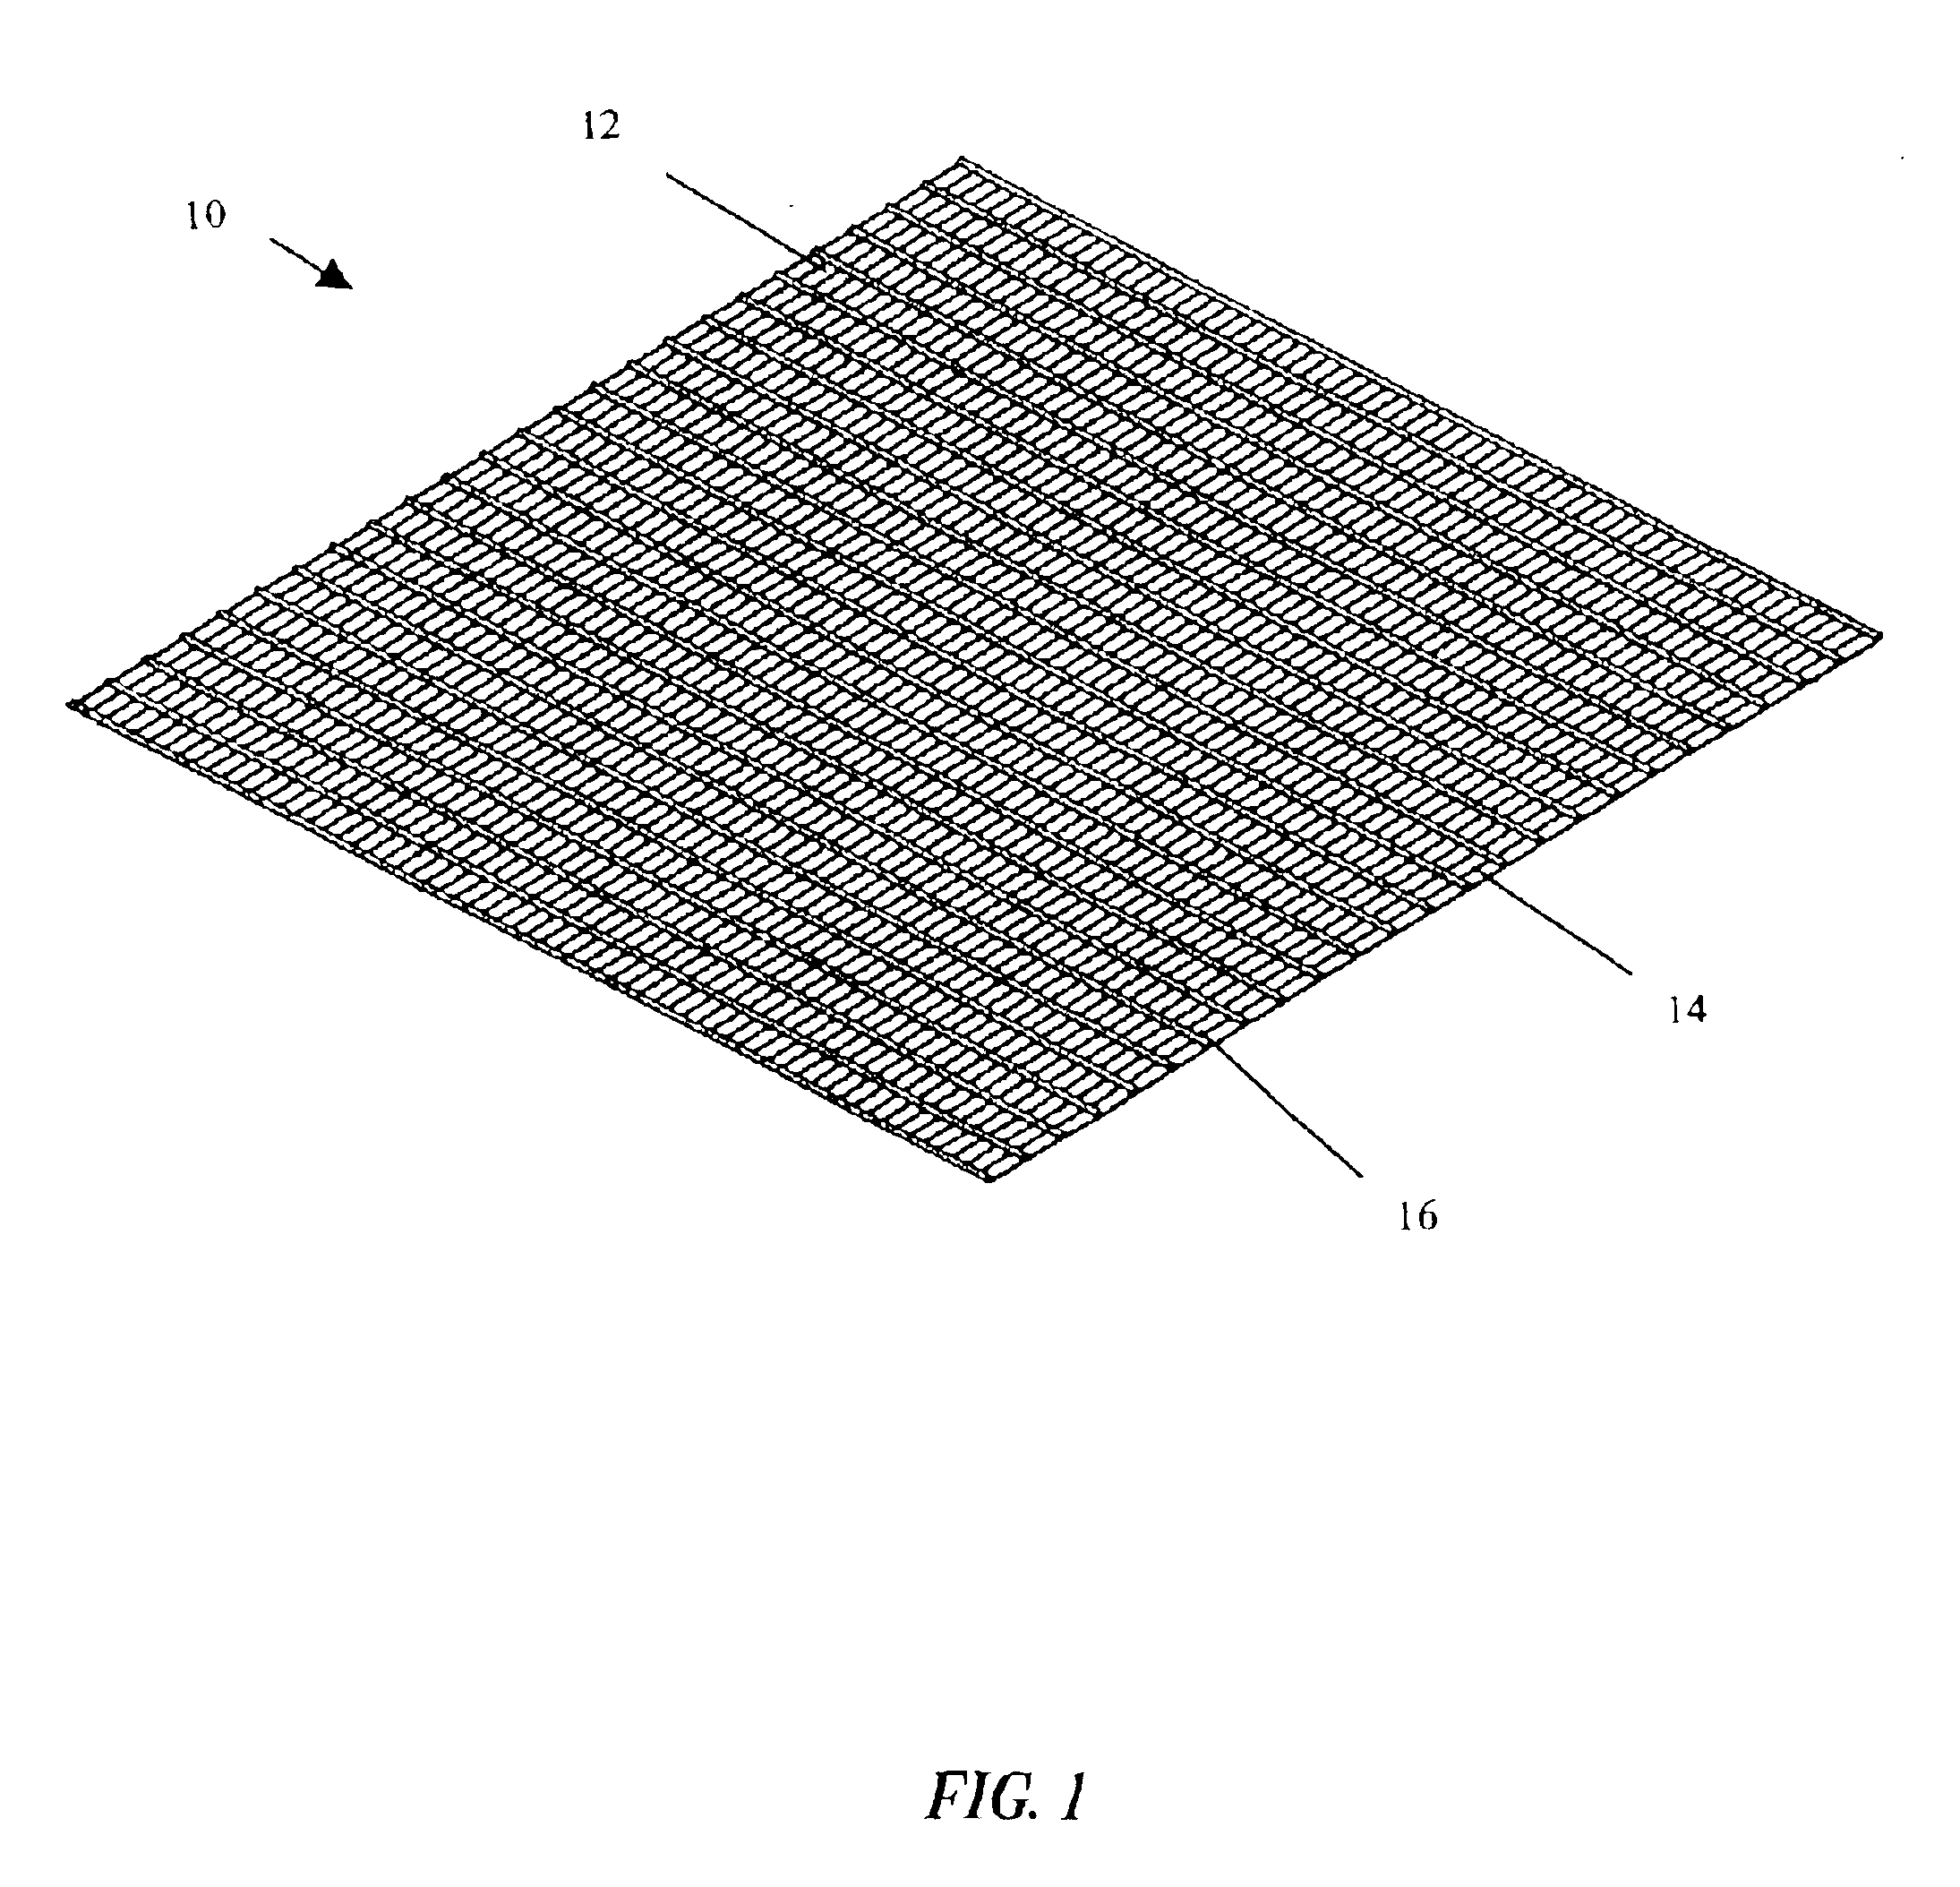 Crosslinked polymer electrolyte membranes for heat and moisture exchange devices